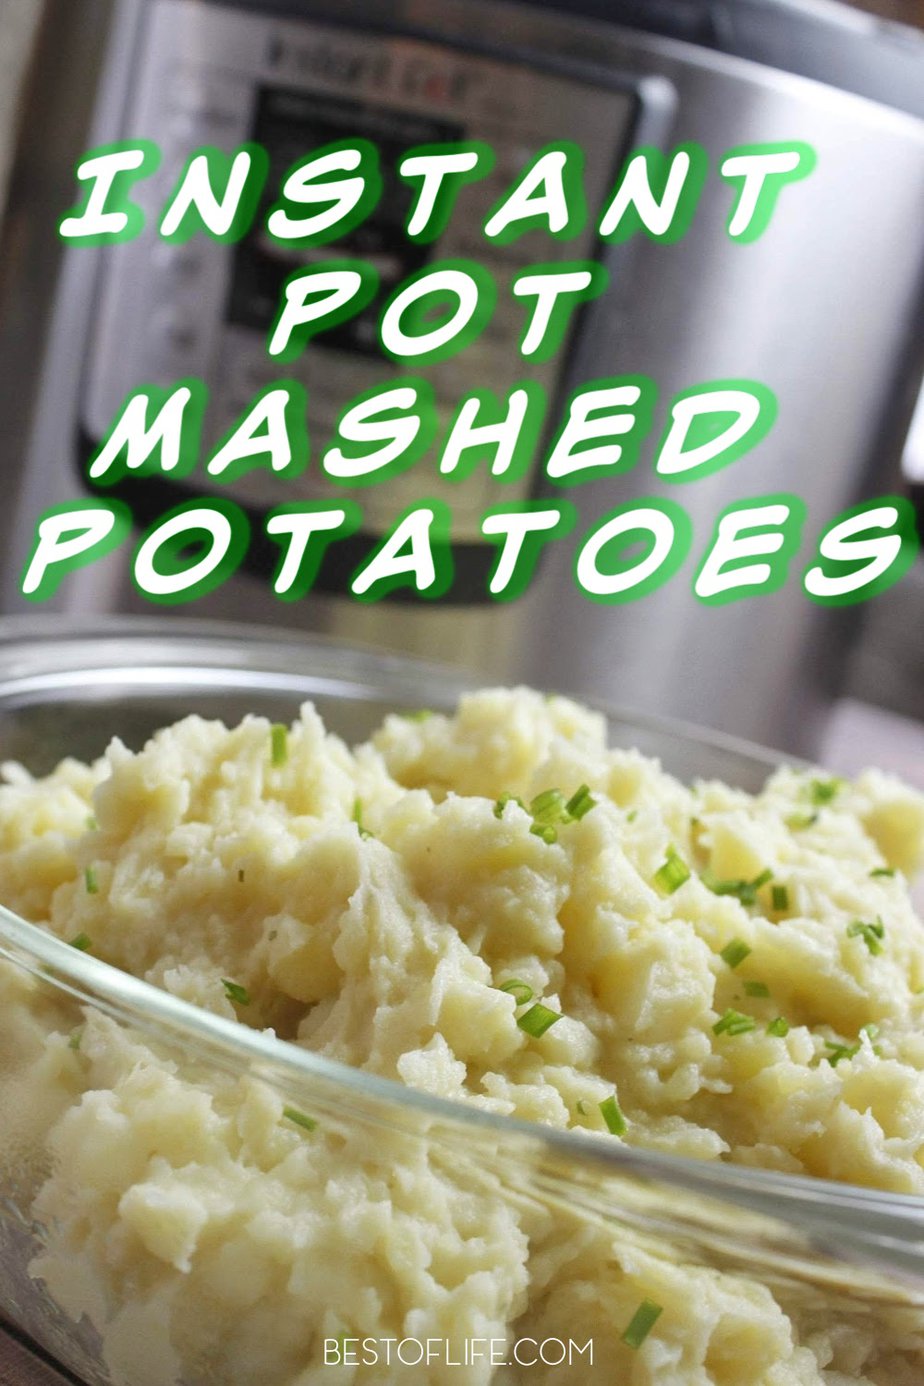 Our easy instant pot mashed potatoes recipe will quickly become a staple recipe in your weekly meal planning! The potatoes come out perfect every time and clean up is a breeze! Instant Pot Recipes | Side Dish Recipes | Instant Pot Side Dish Recipes | Instant Pot Potatoes Recipe | Mashed Potatoes Recipe #instantpot #instantpotrecipe